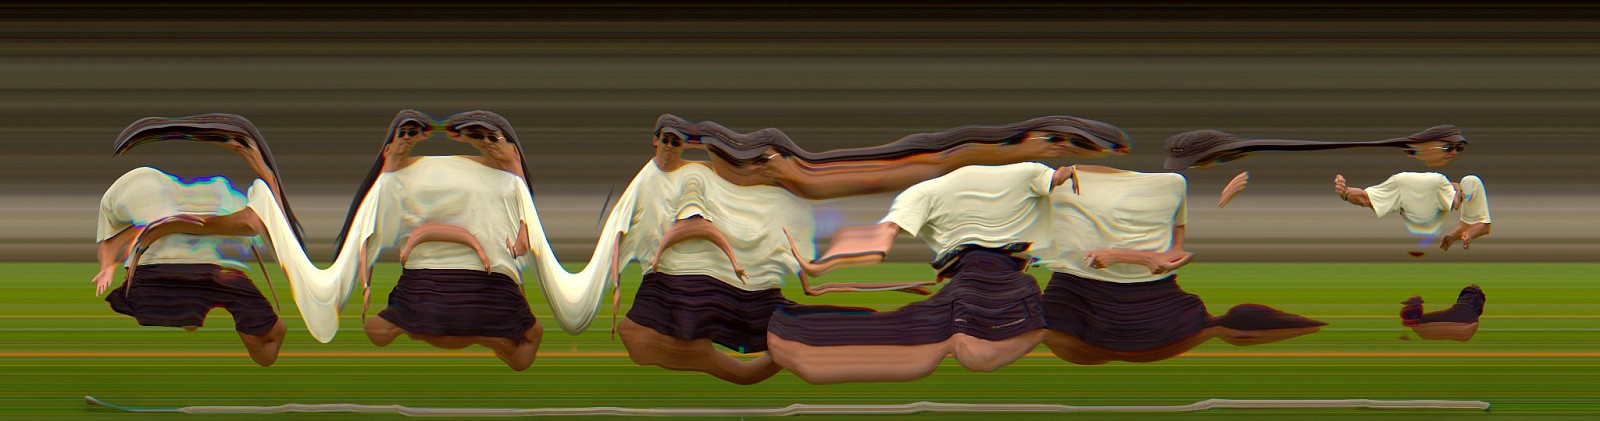 Jay Mark Johnson, TAICHI MOTION STUDY 145, 2005 Los Angeles CA
archival pigment on paper, mounted on aluminum, 40 x 151 in. (101.6 x 383.5 cm)